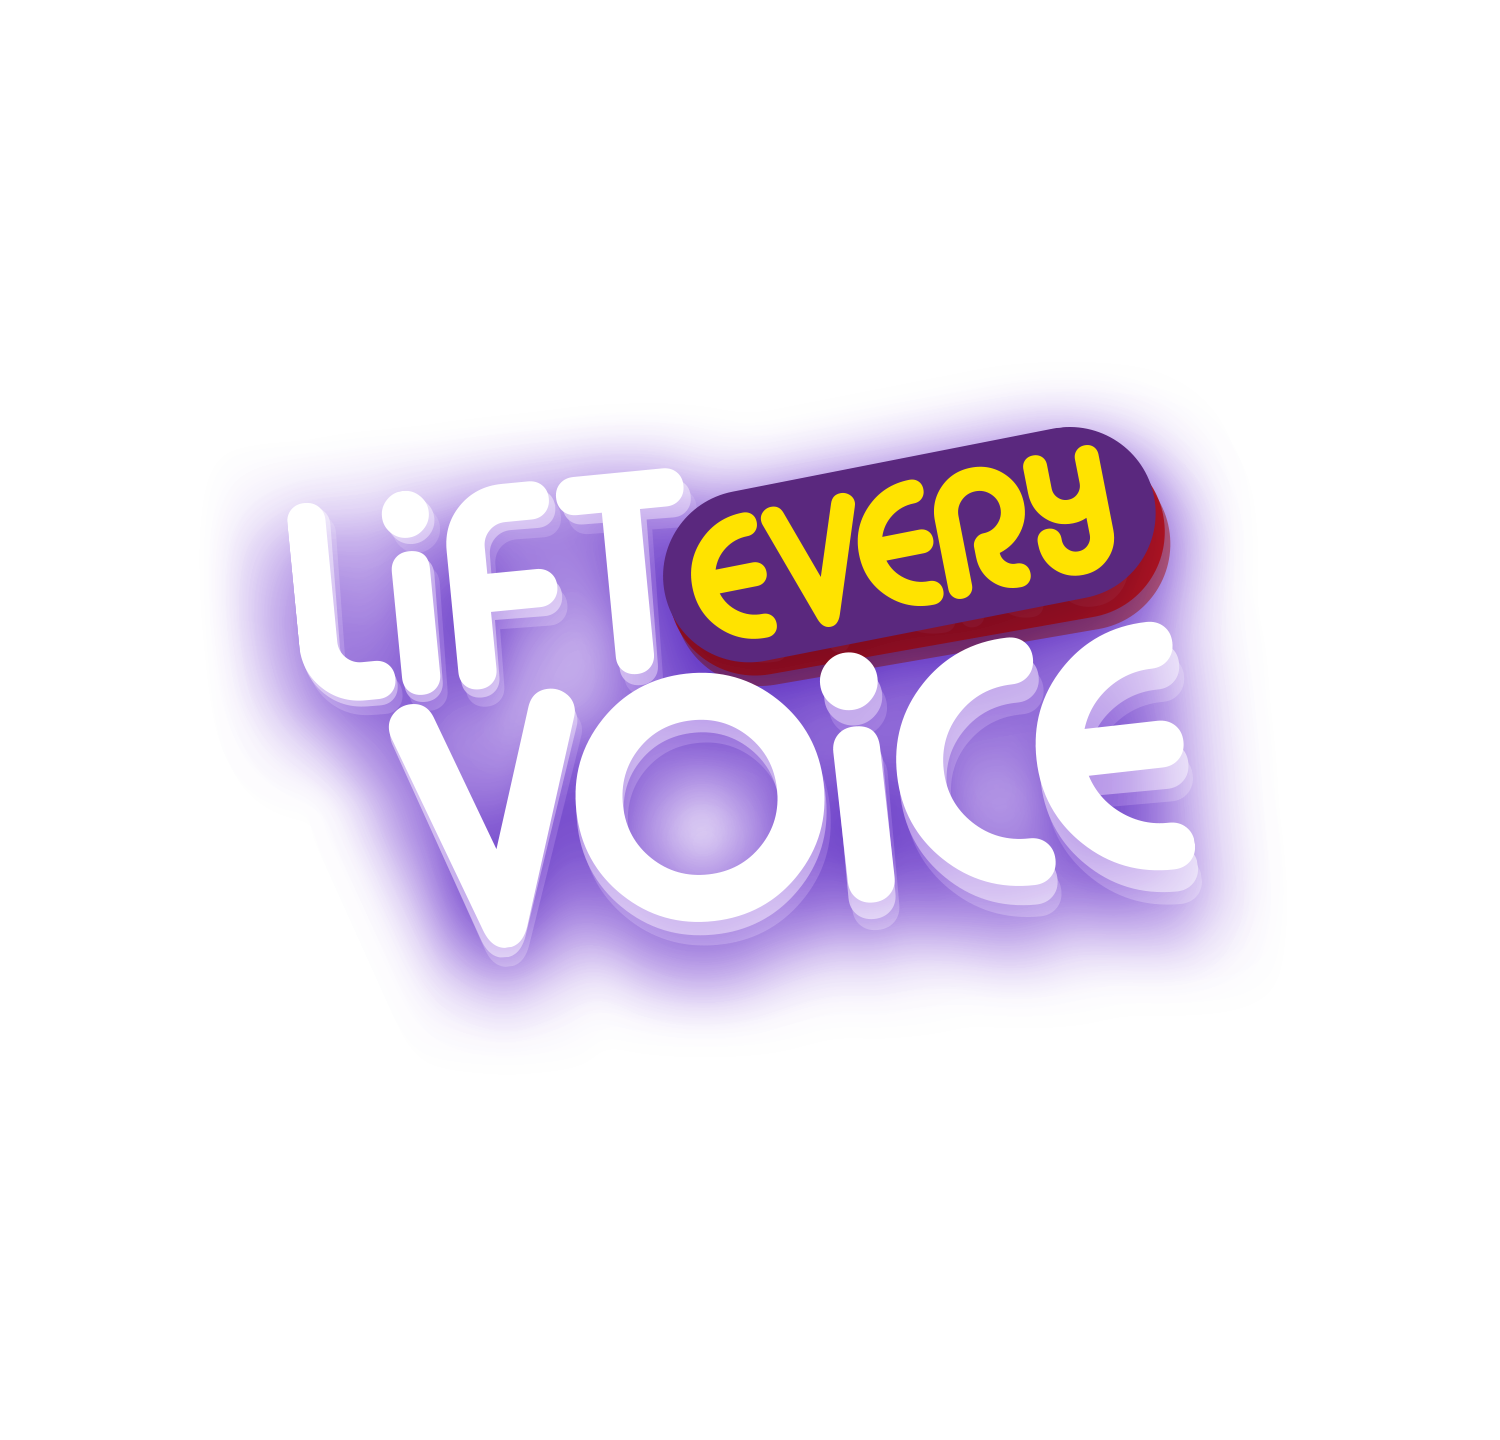 Lift Every Voice